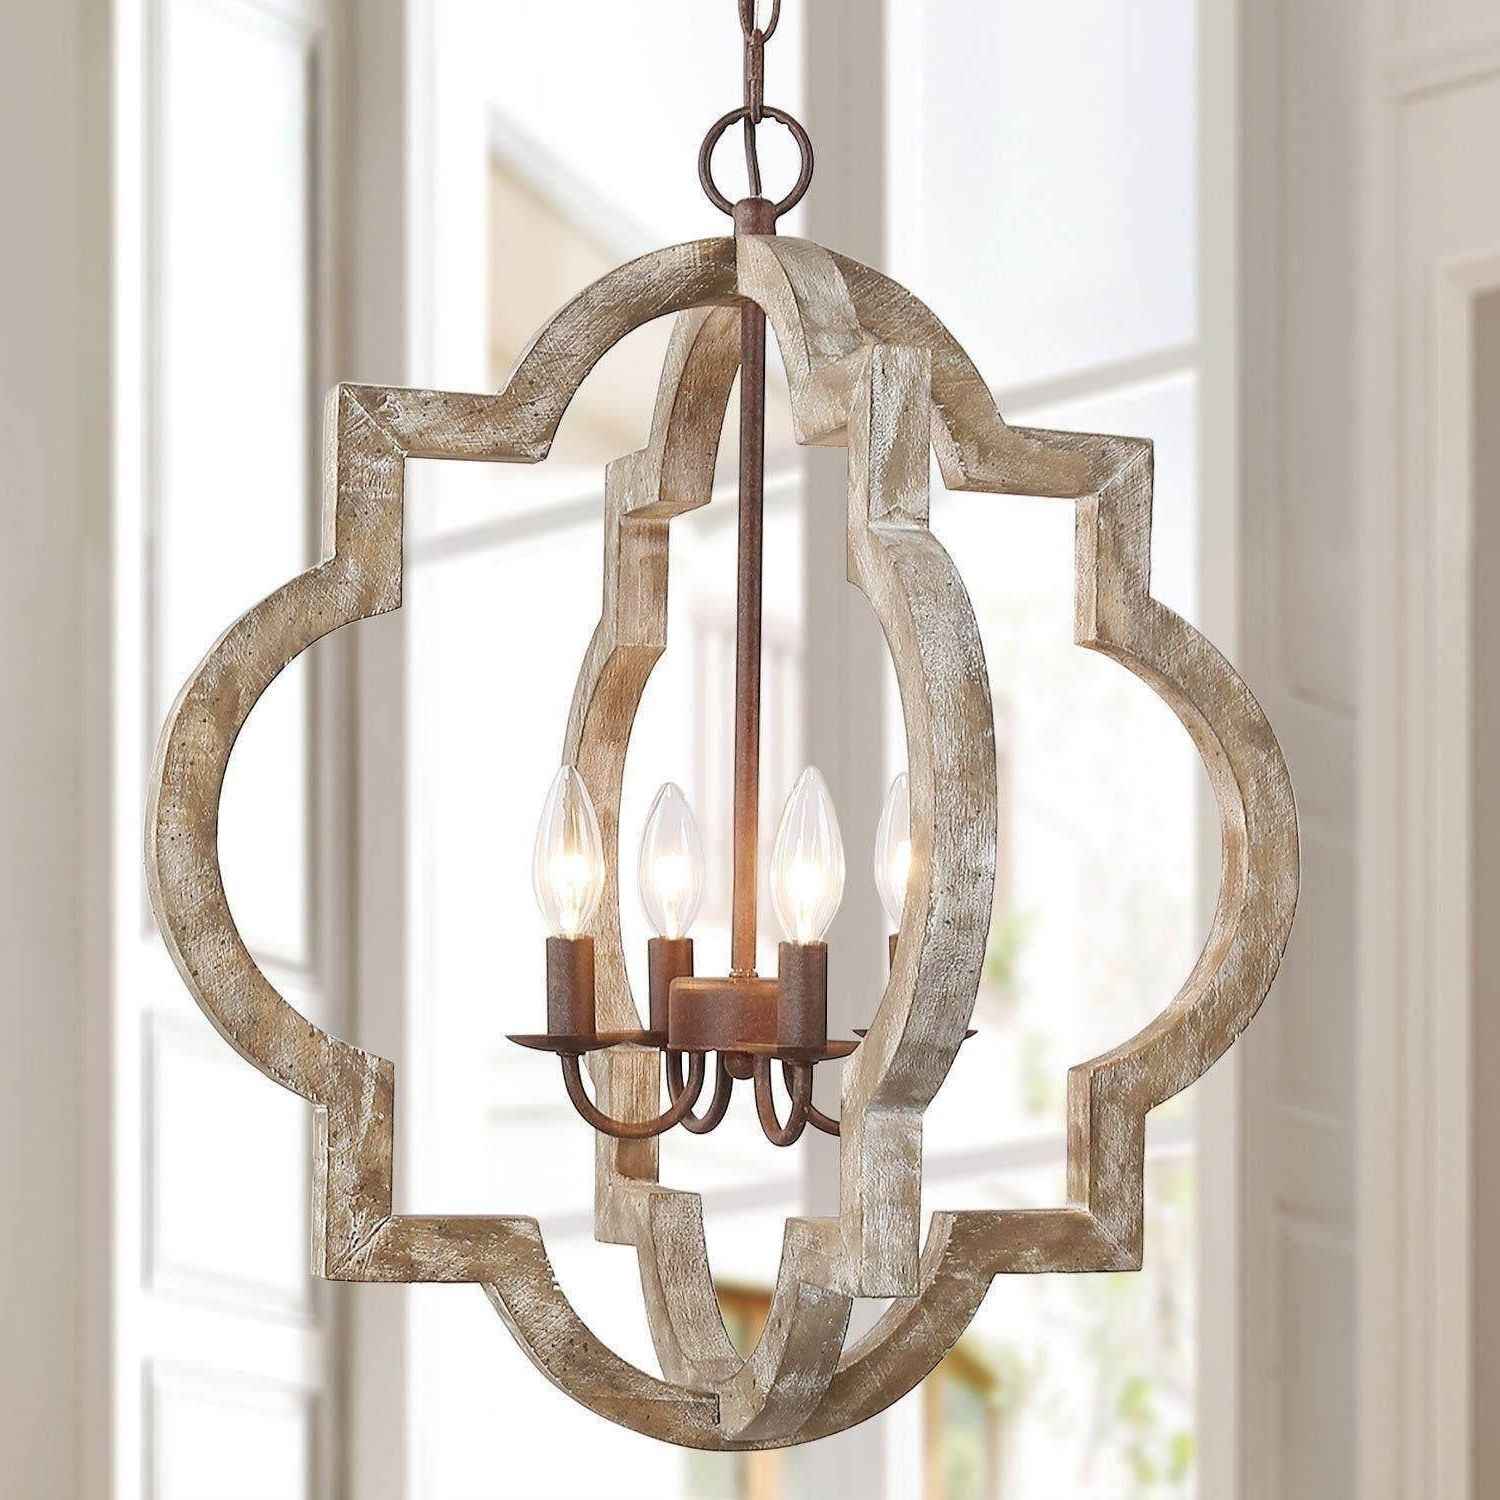 Favorite The Gray Barn Farmhouse Rustic 4 Light Distressed Wood Modern Lantern  Chandelier For Living Room – On Sale – Overstock – 29204959 Within Rustic Gray Lantern Chandeliers (View 7 of 15)